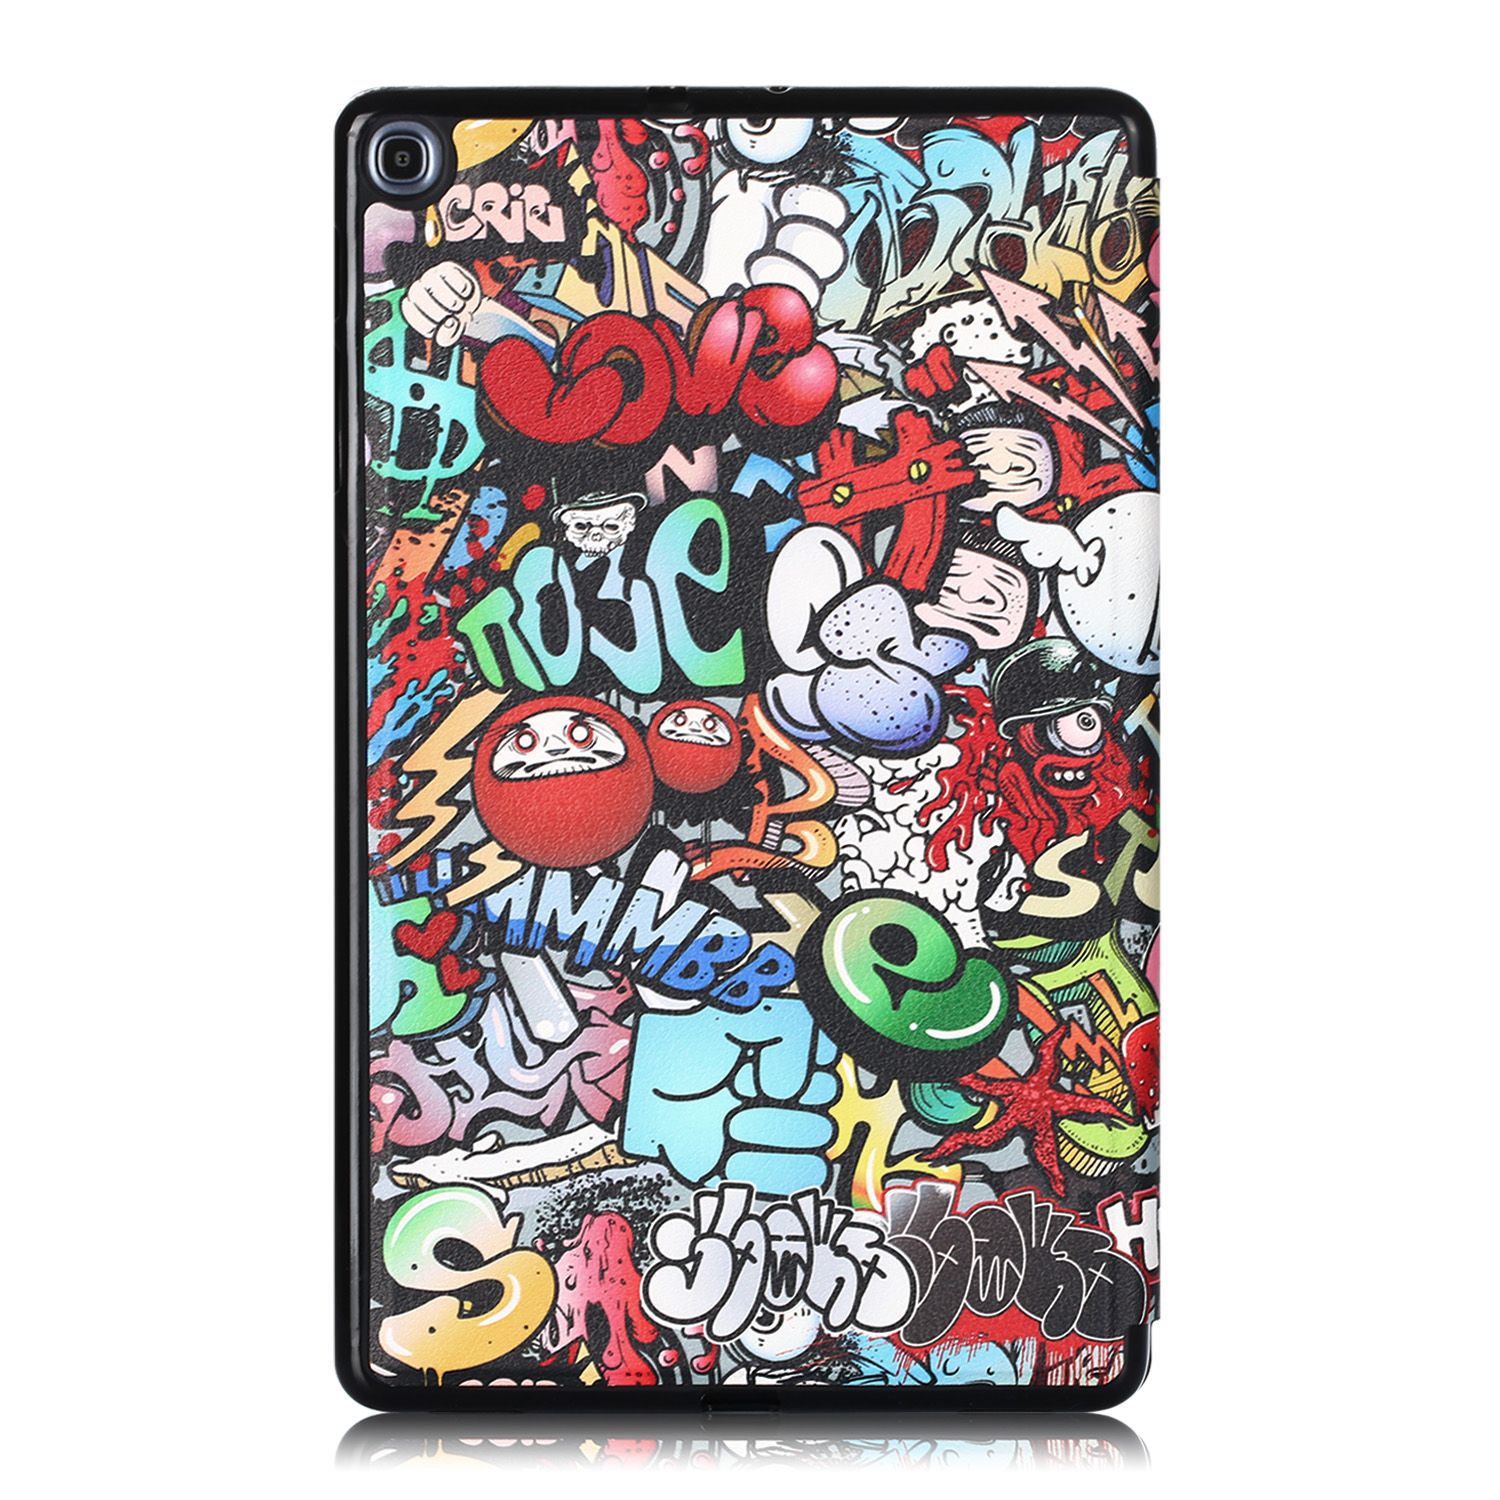 Folding-Stand-Tablet-Case-Cover-for-Samsung-Tab-A-101-T510---Doodle-1556791